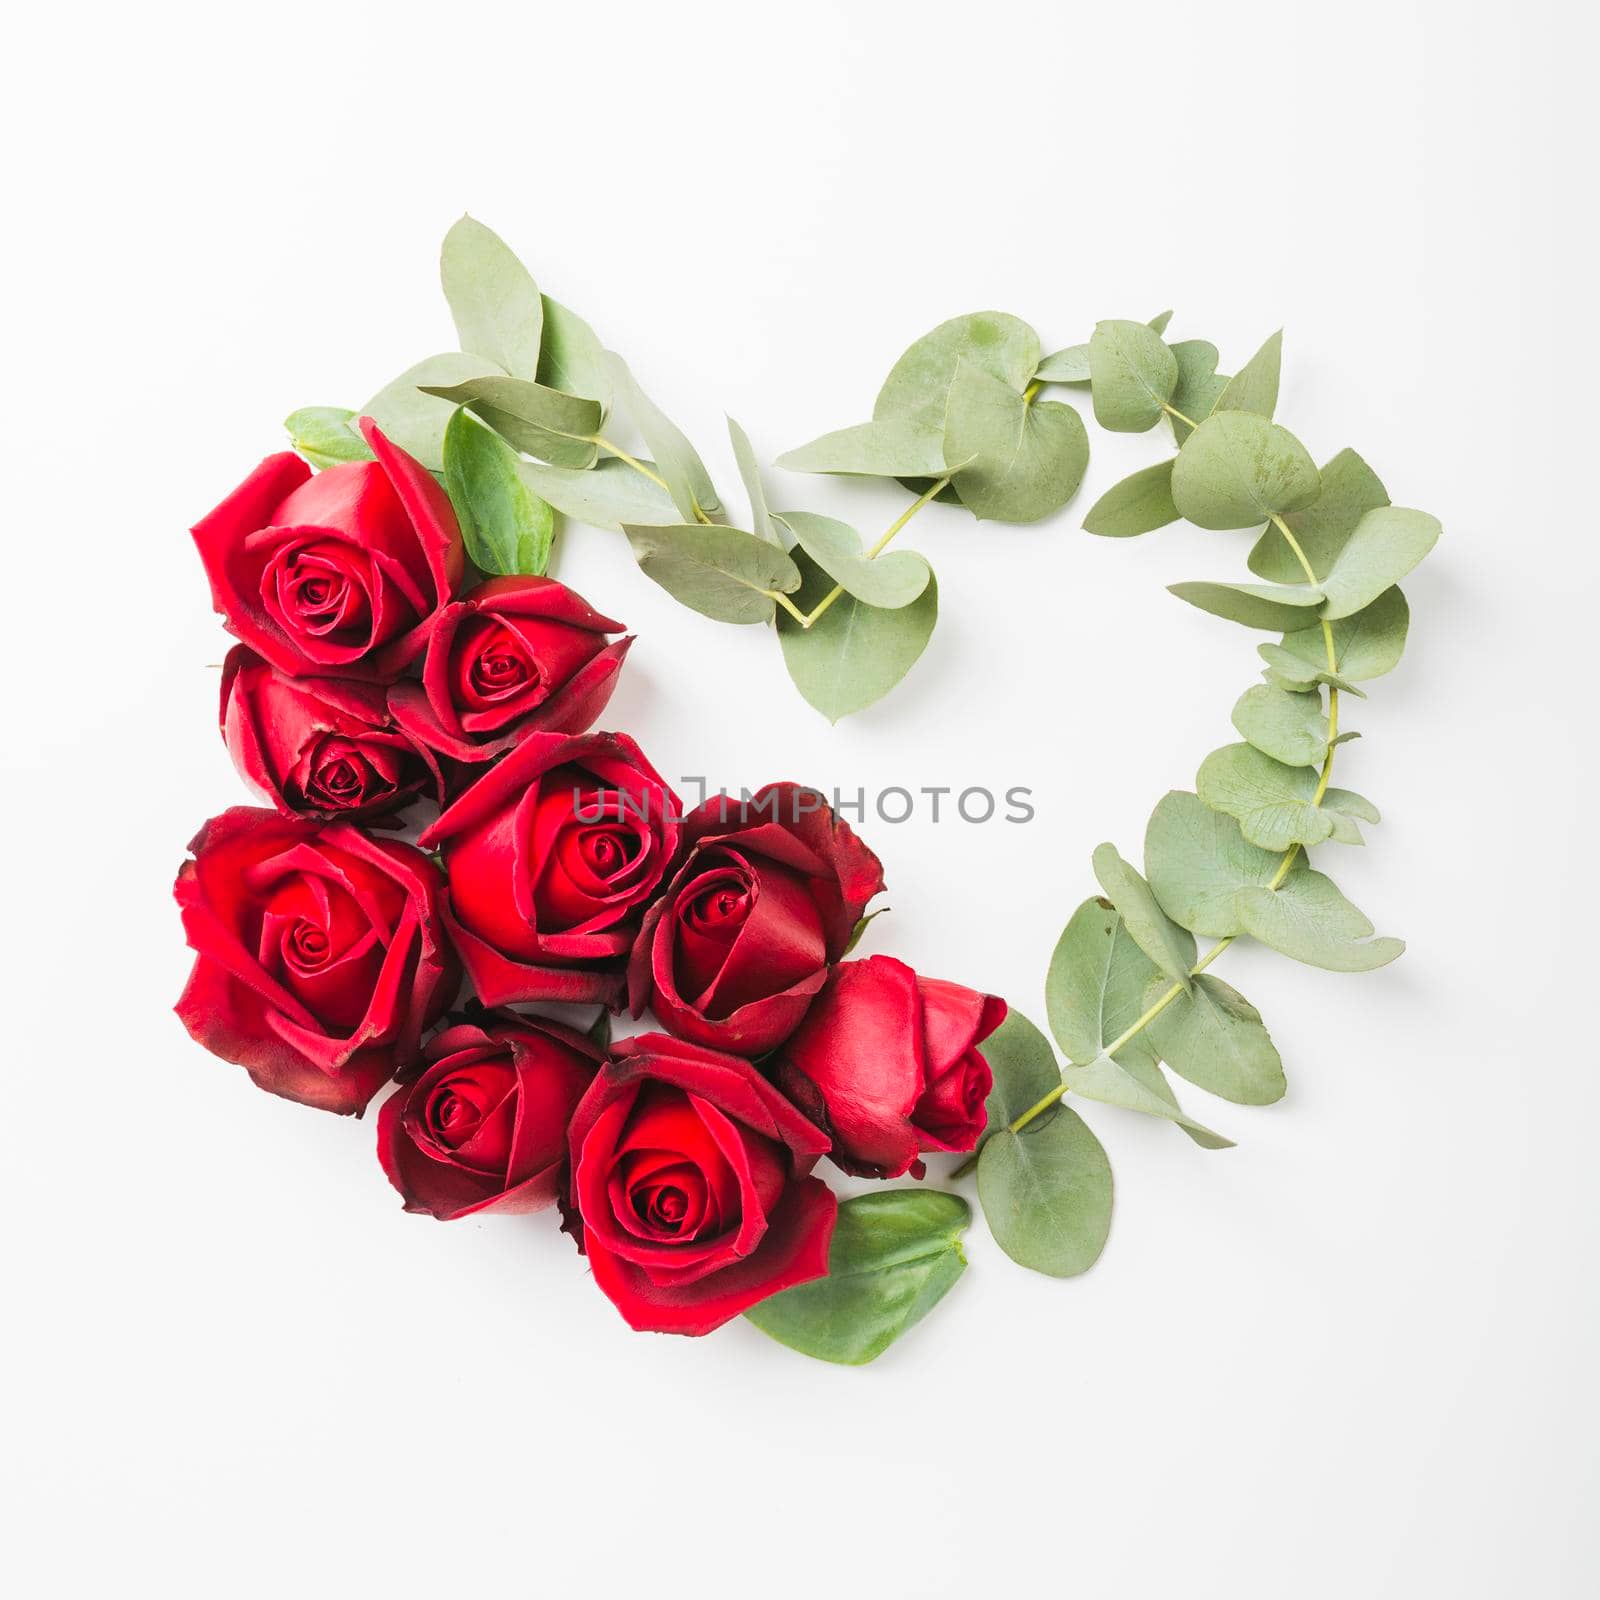 heart shape made with roses flower twig white background. High quality photo by Zahard